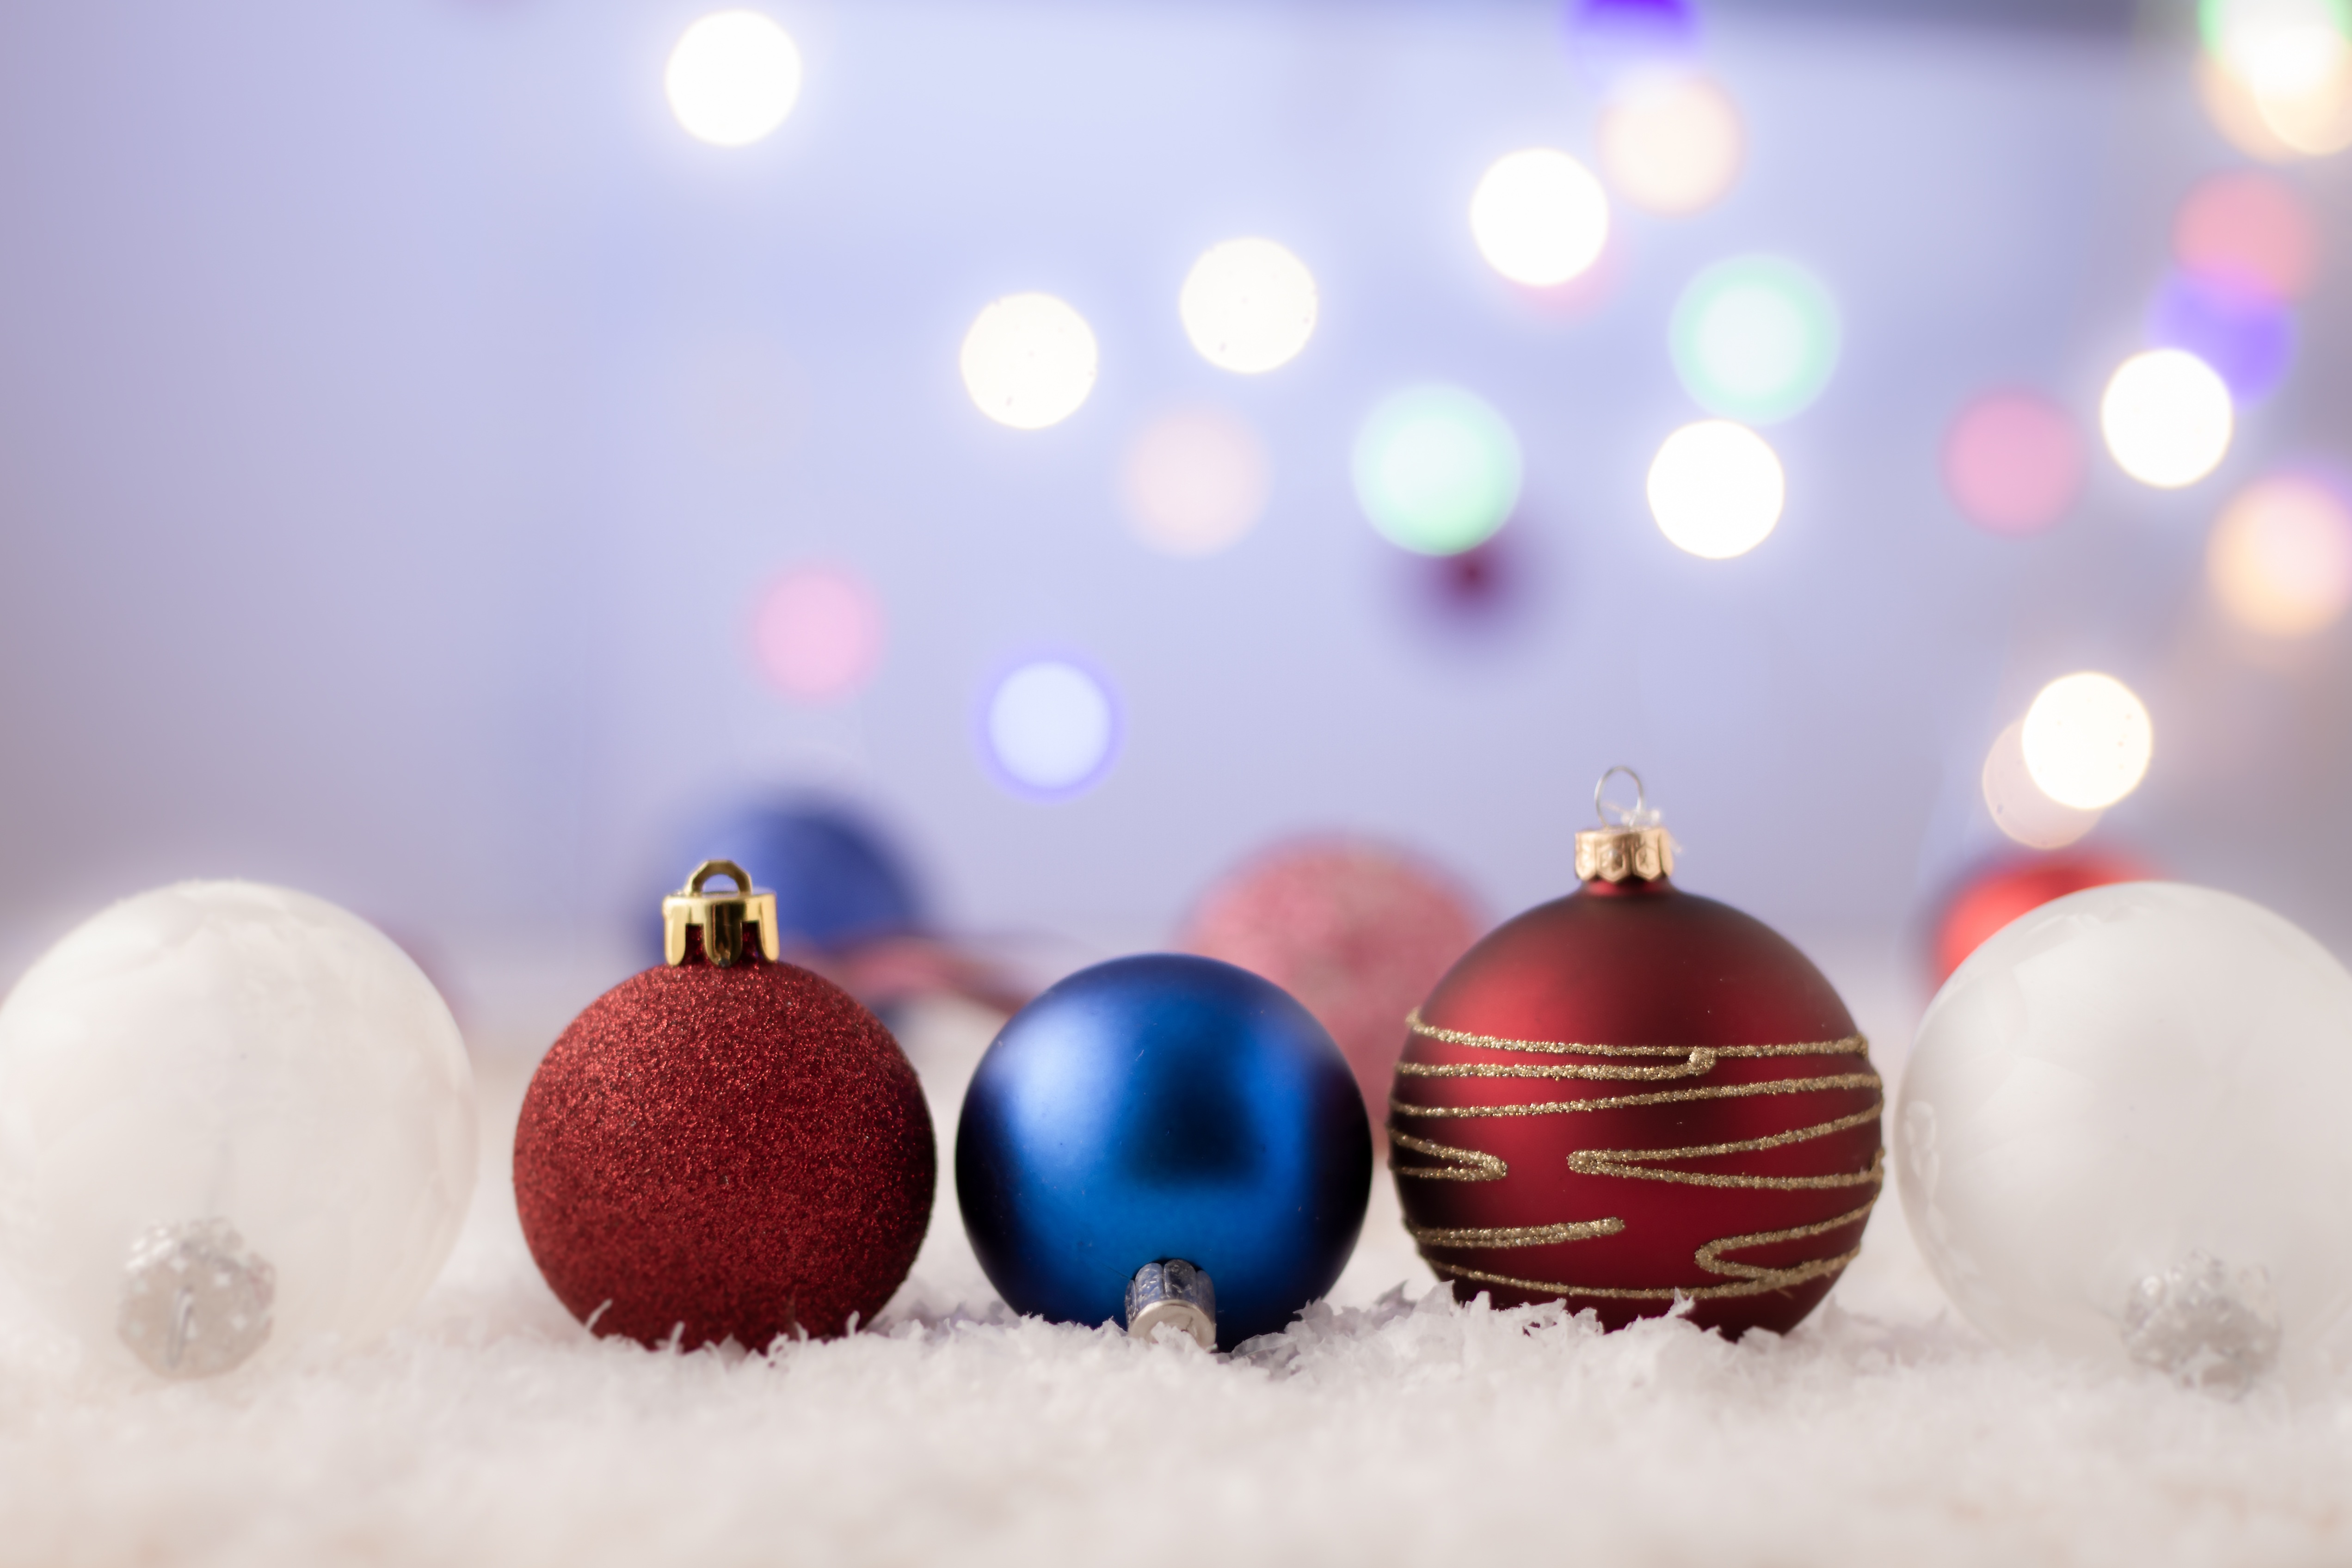 holidays, new year, decorations, toys, christmas, holiday, balls Image for desktop